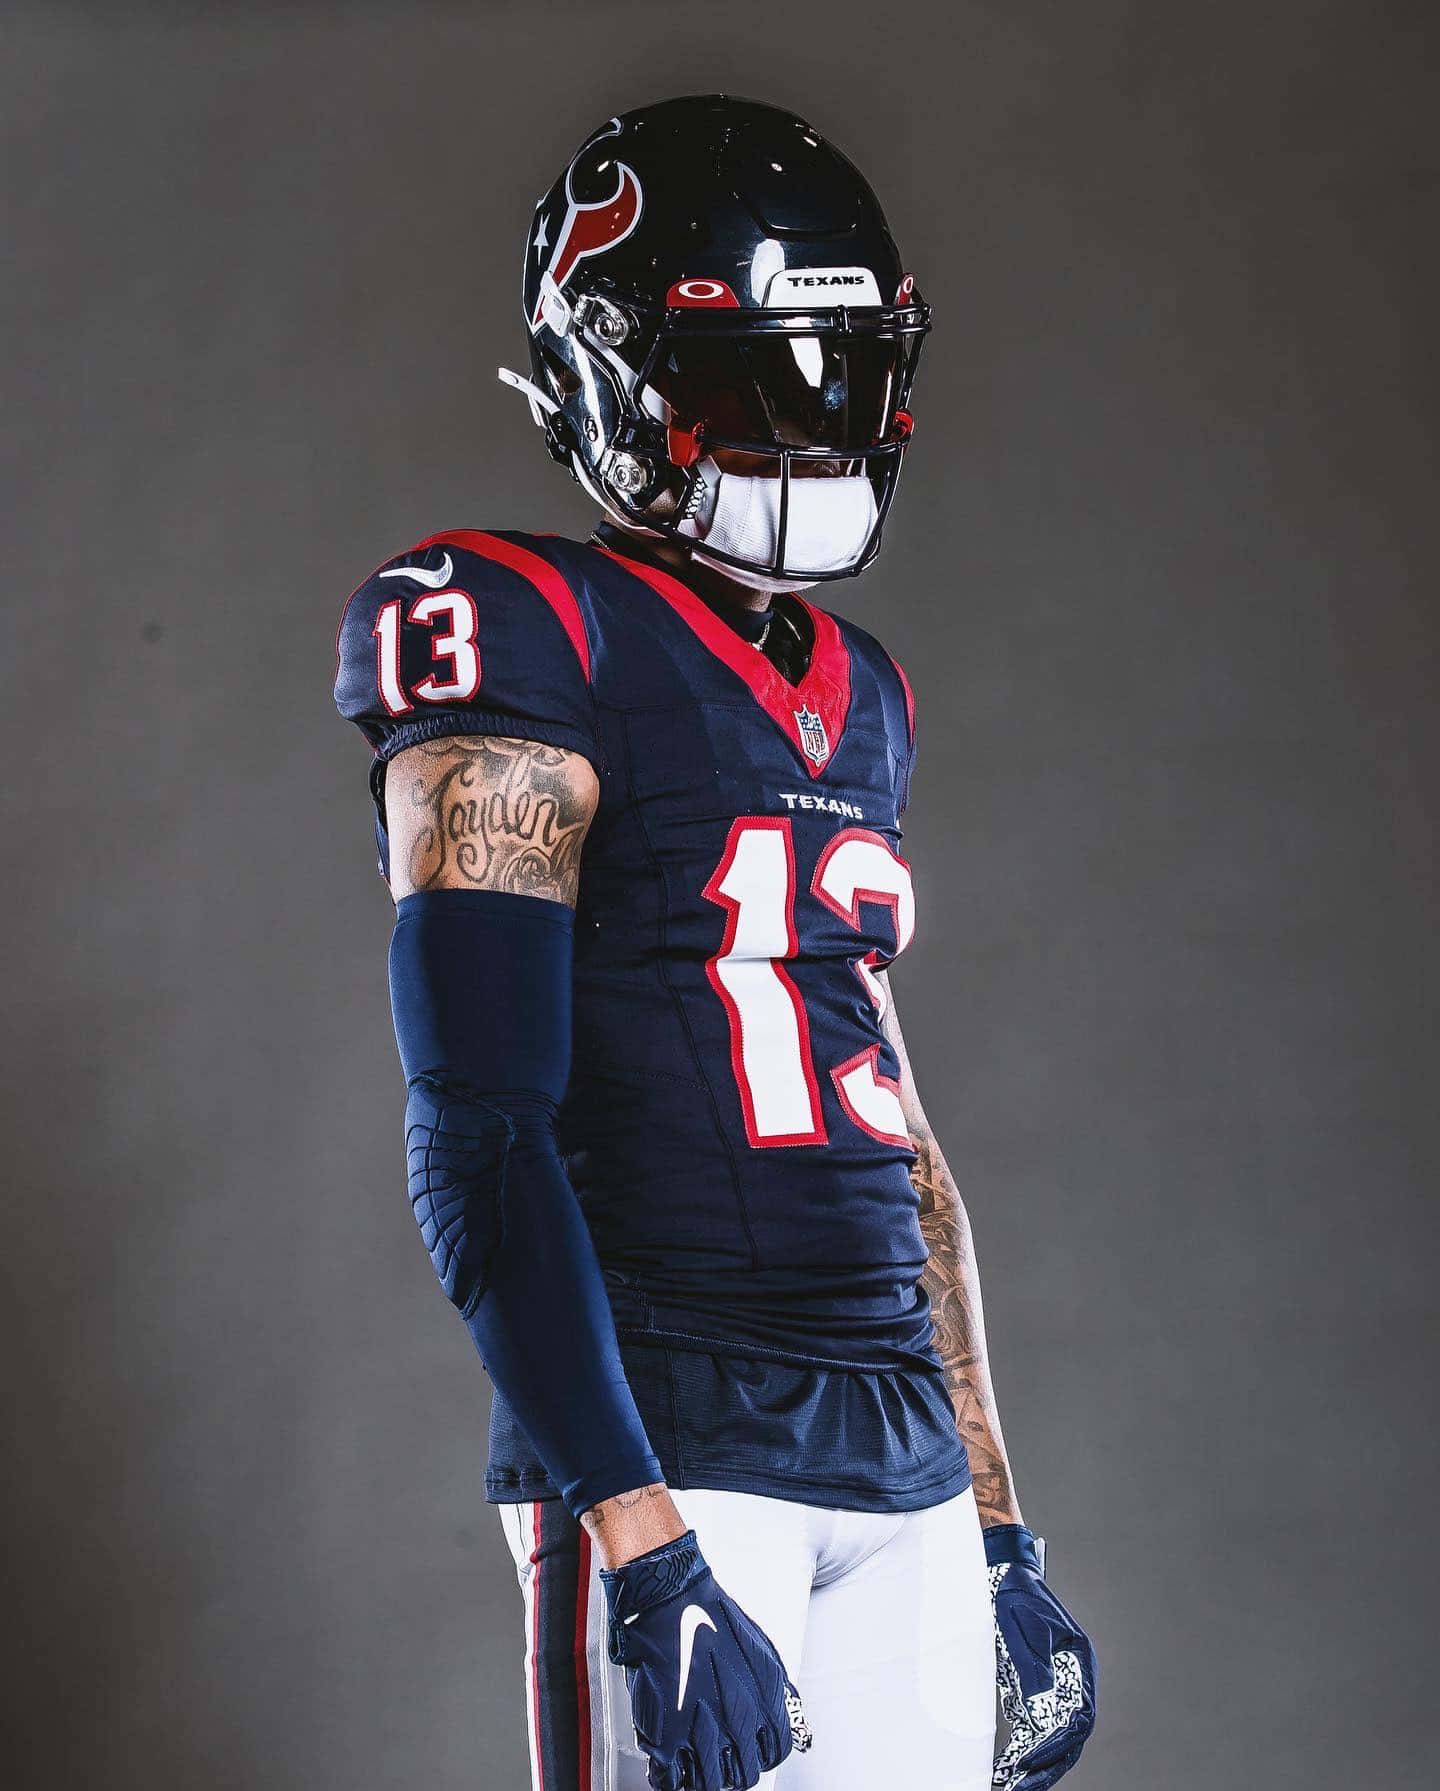 Houston Texans Player Number13 Wallpaper